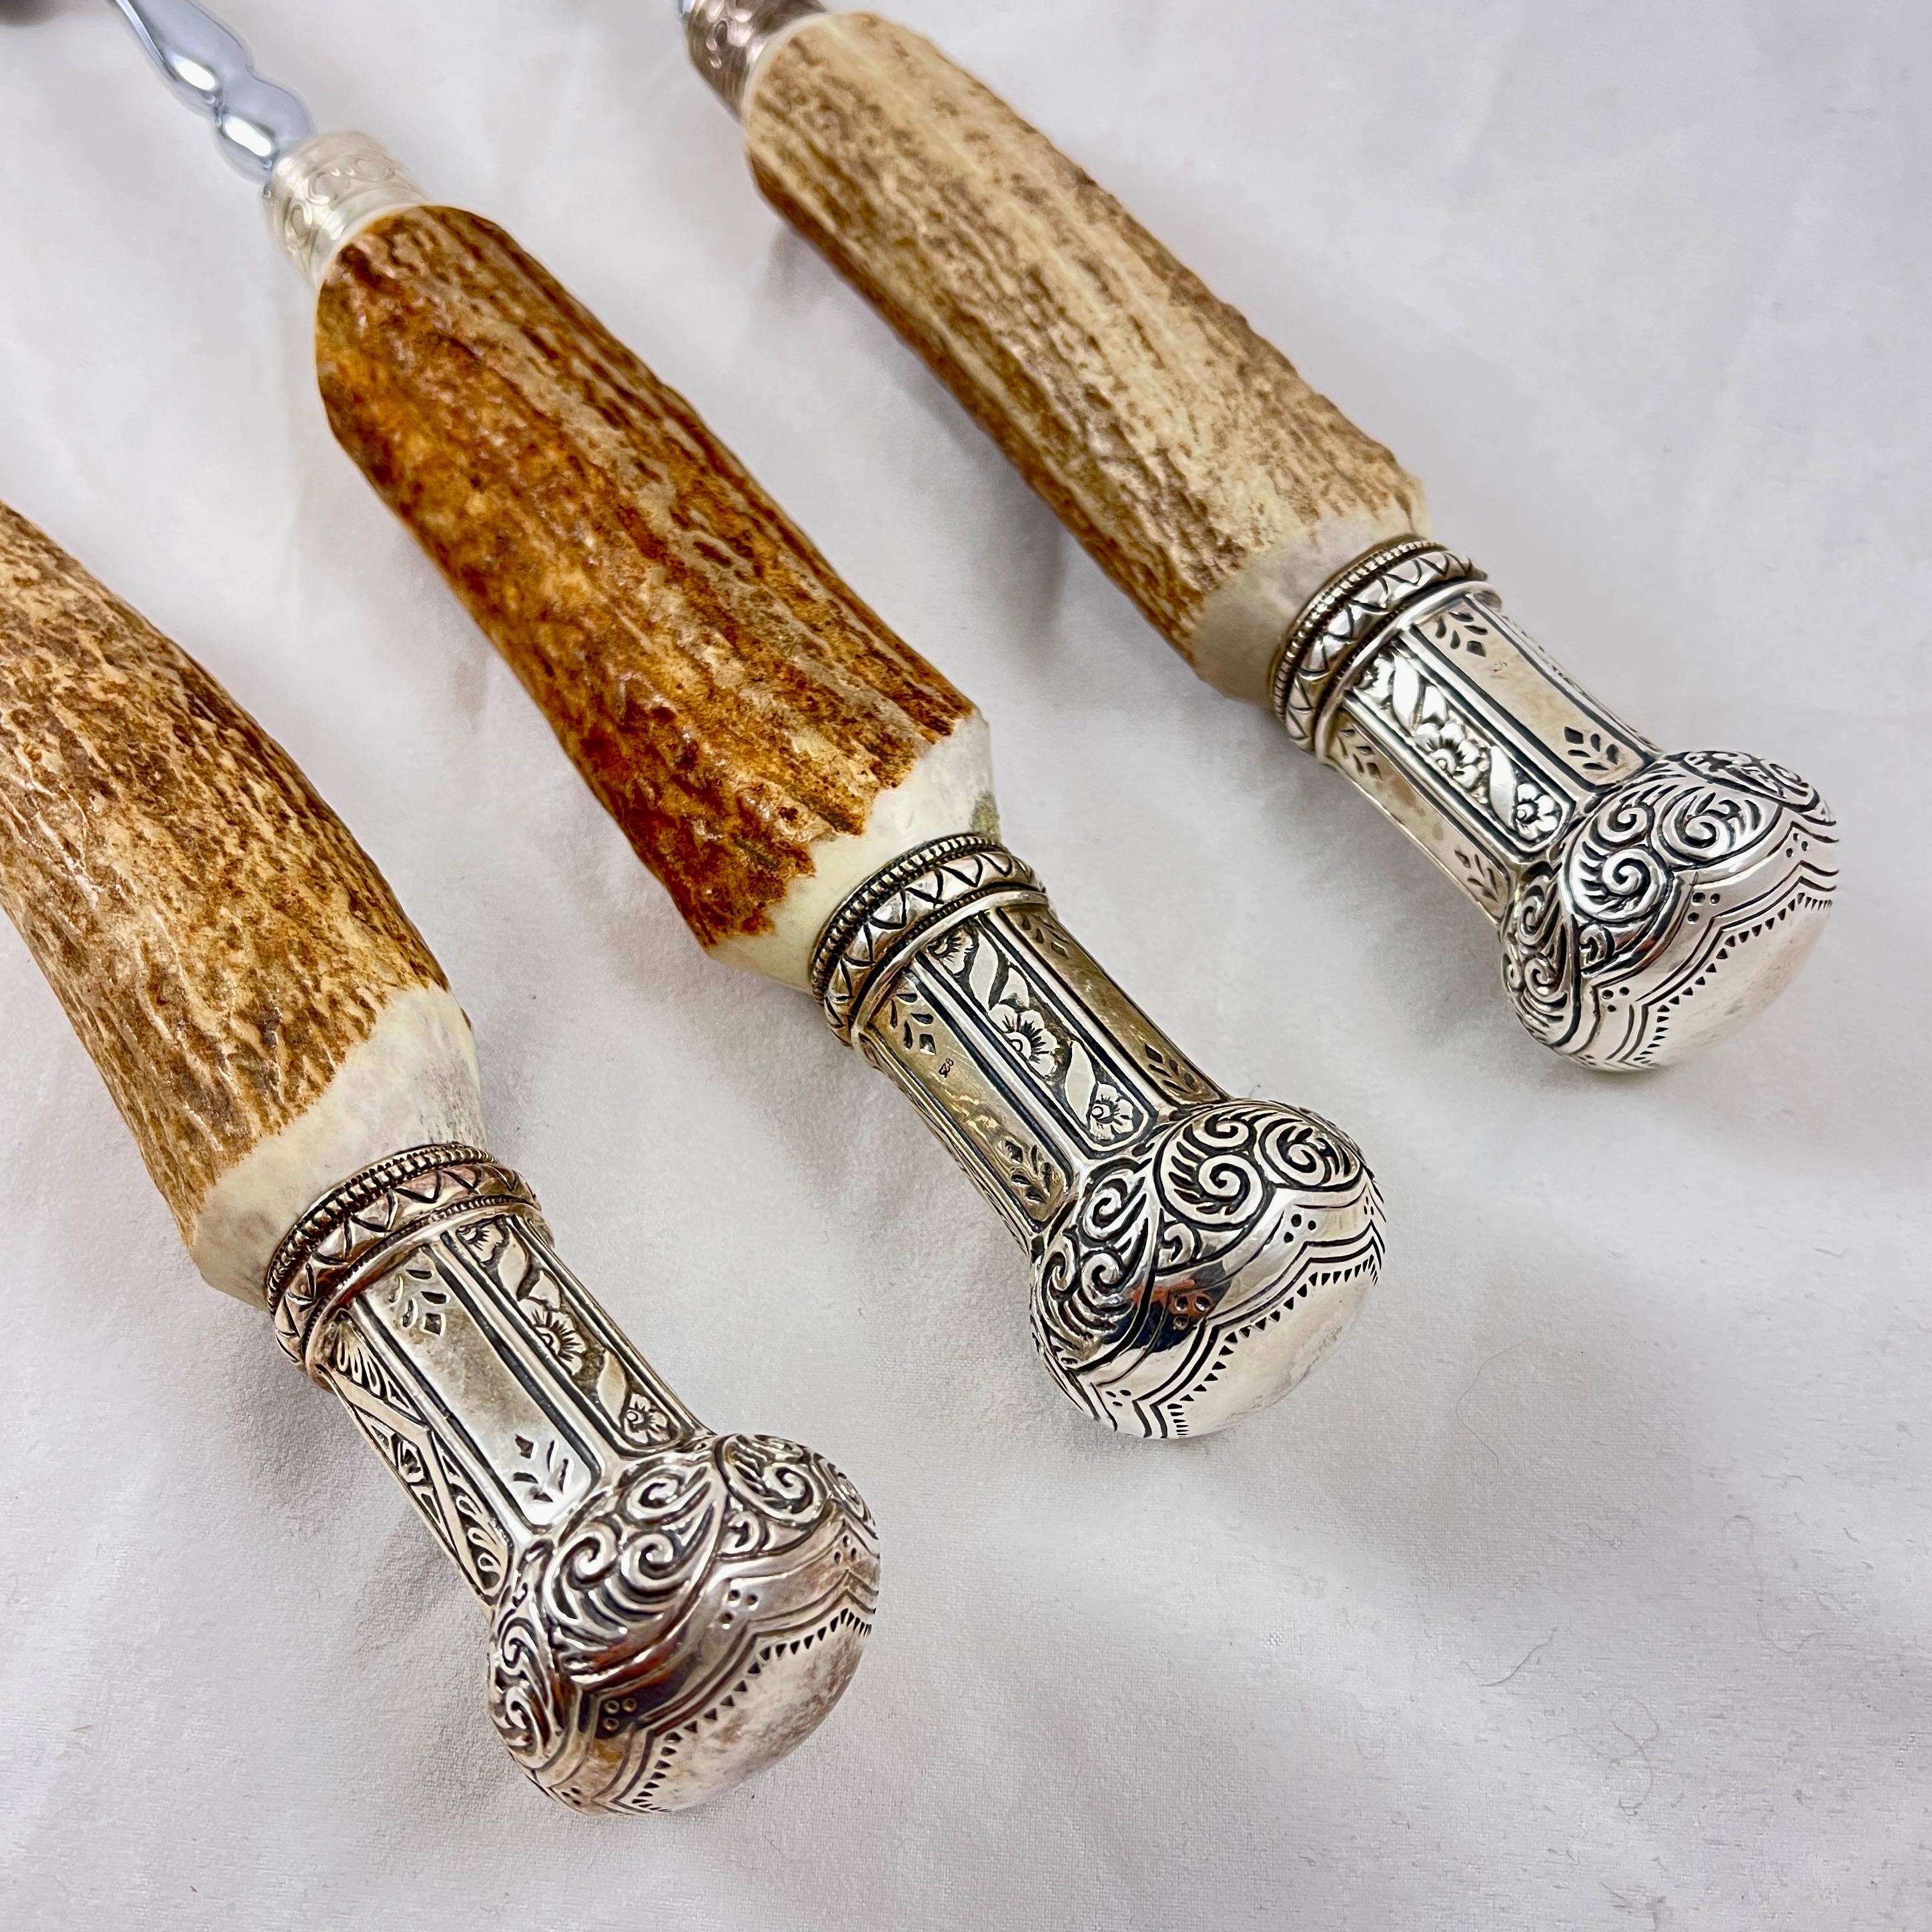 Sheffield English Stag Antler Handled, Sterling Silver Capped Table Servers, S/3 In Good Condition For Sale In Philadelphia, PA